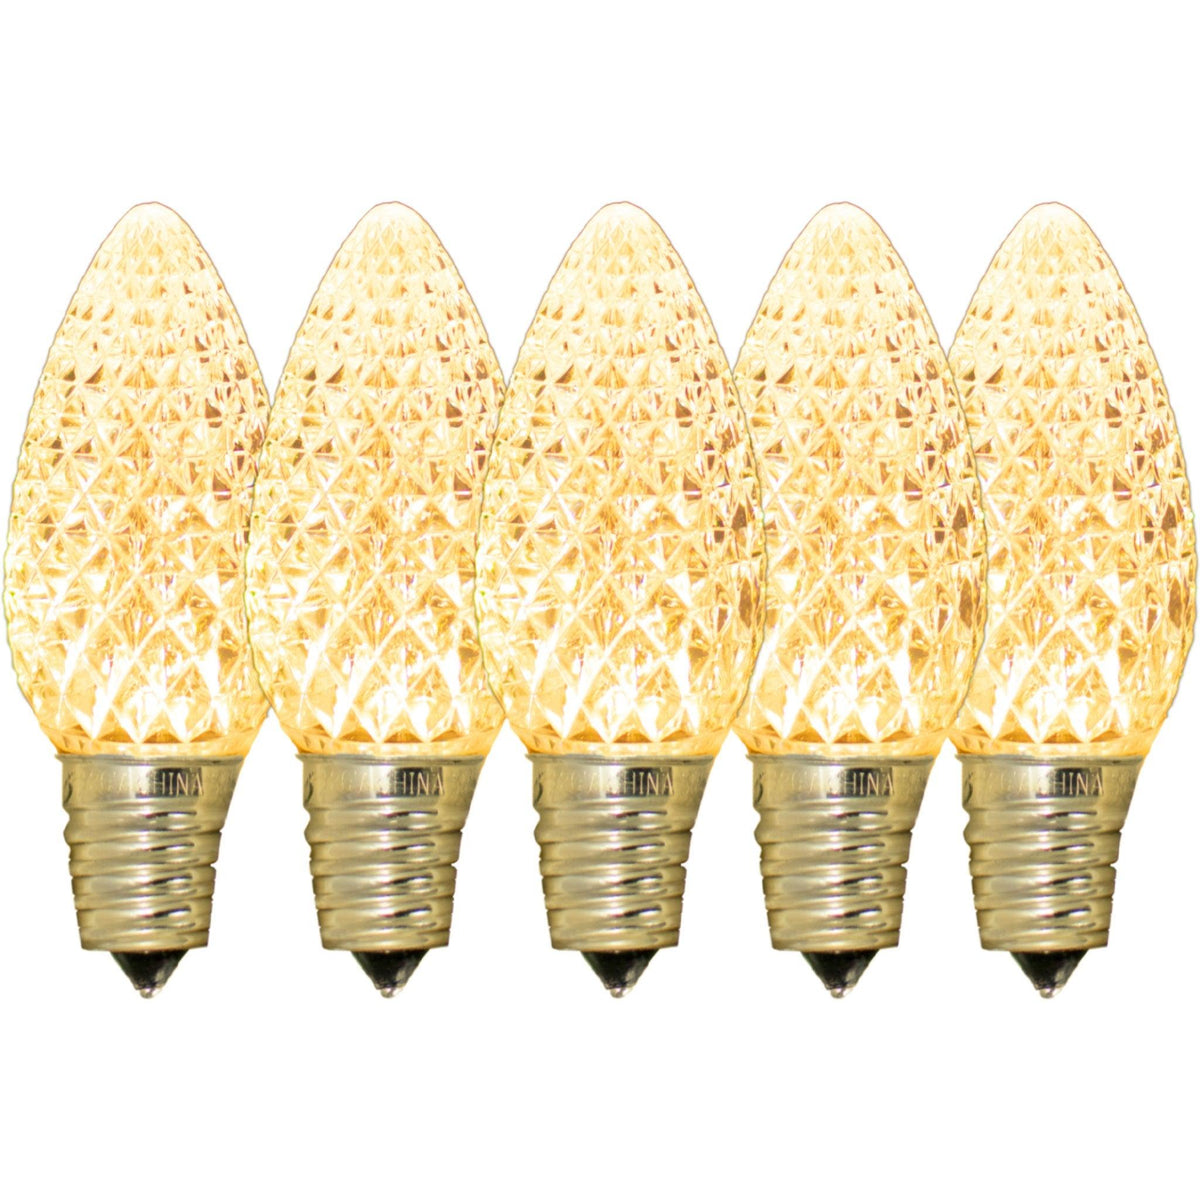 Shop Lee Display for C9 LED Faceted Sun Warm White Light Bulbs Sold in the box of 25. 0.6 Watts 120 Volts UV Protected & Waterproof Bulbs Outdoor Commercial Quality Use